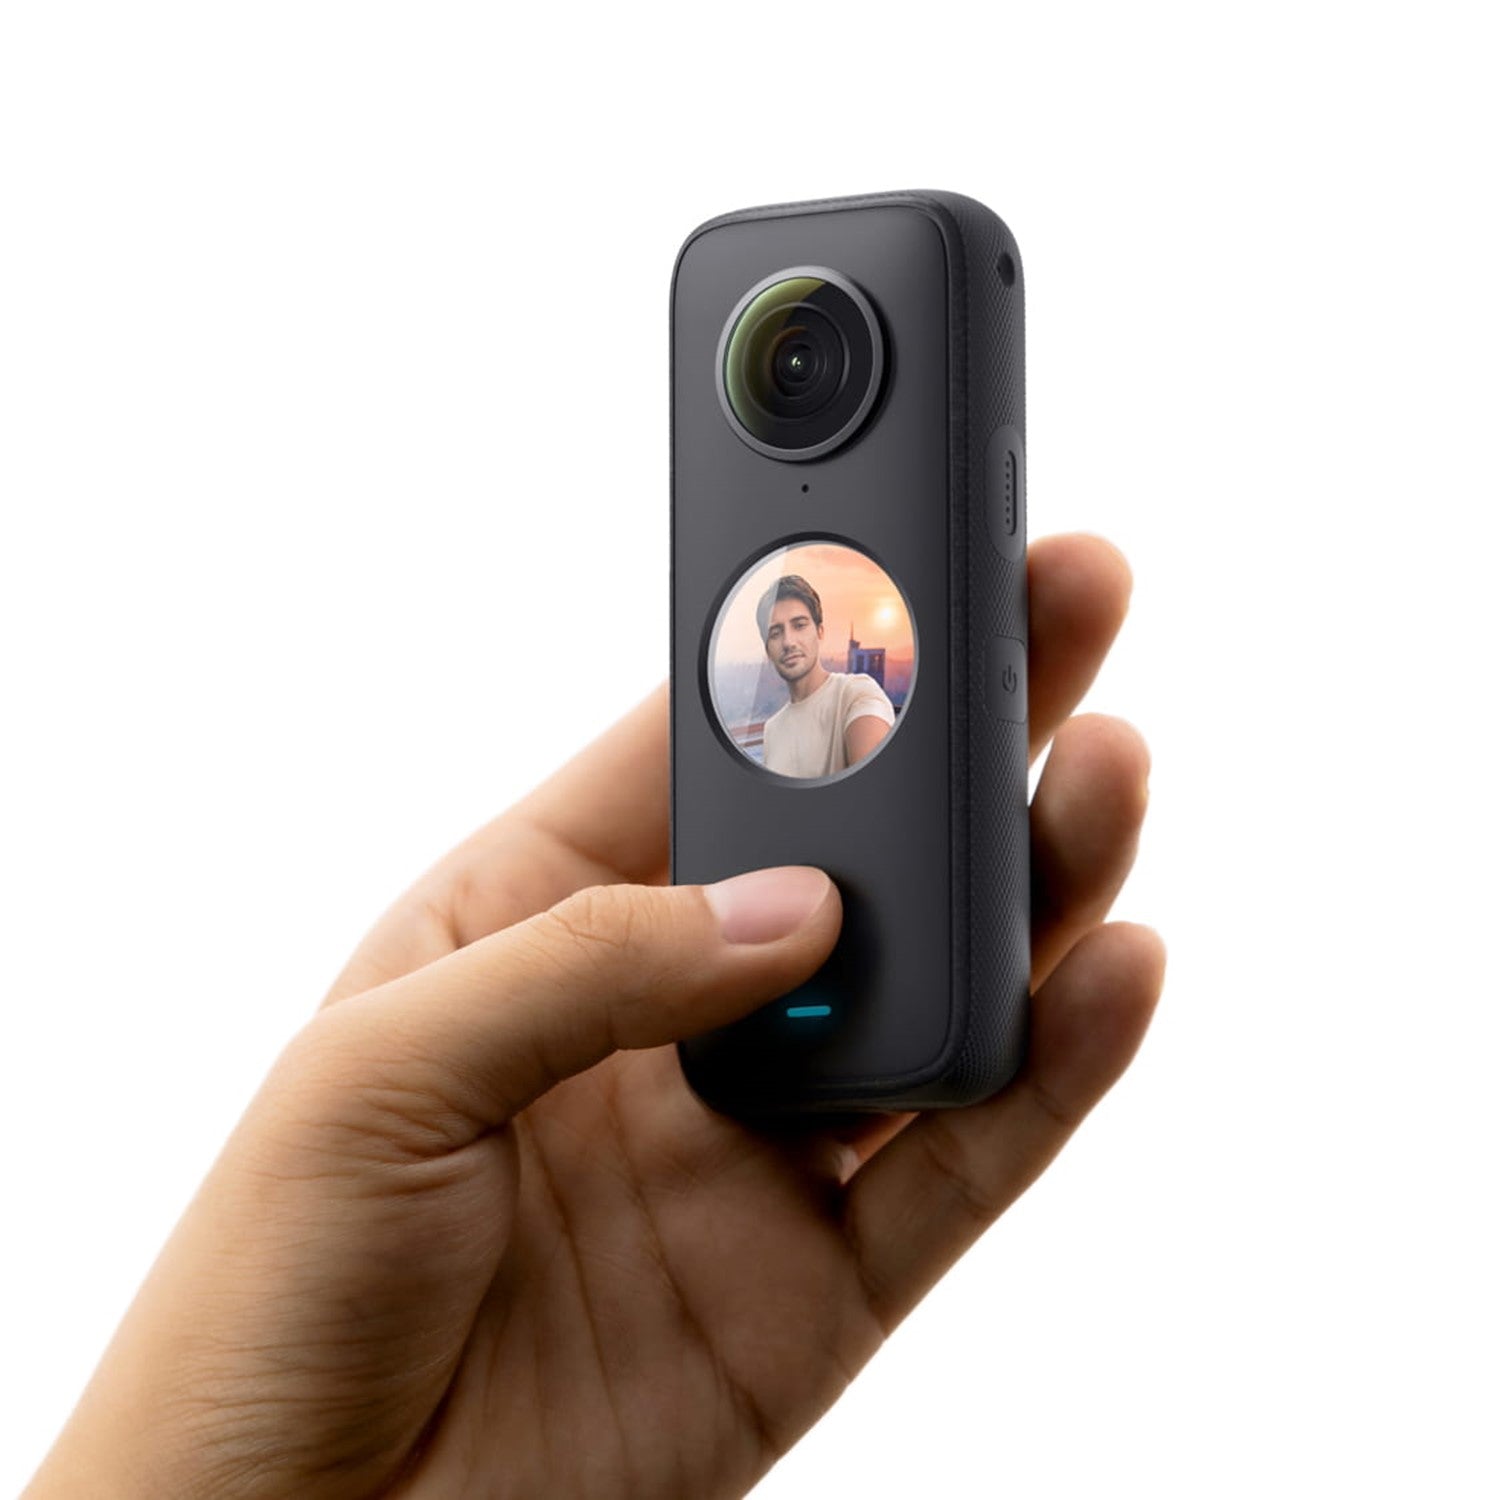 Insta360 One X2 Action Camera